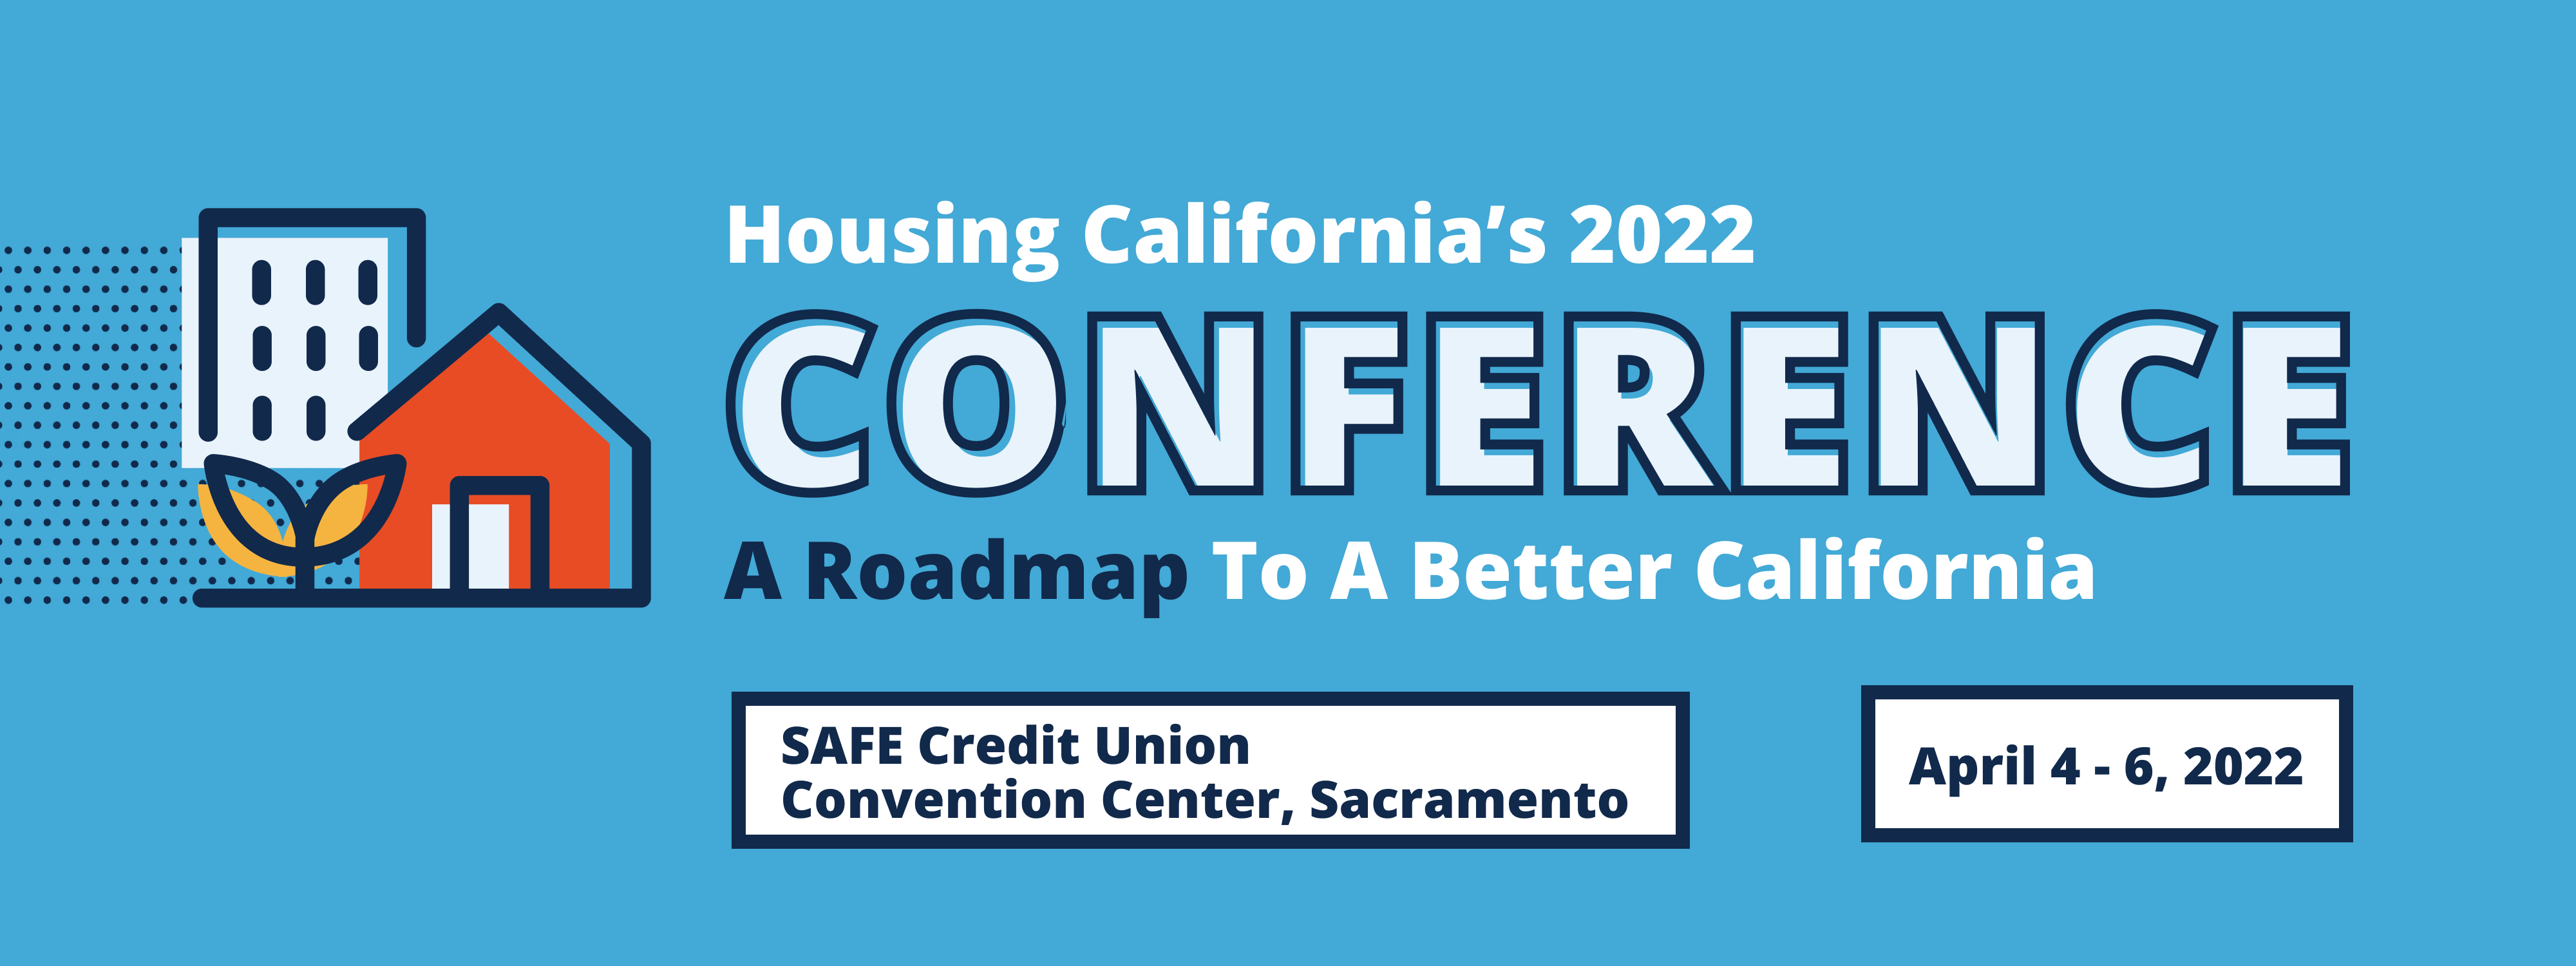 Housing California Conference Banner